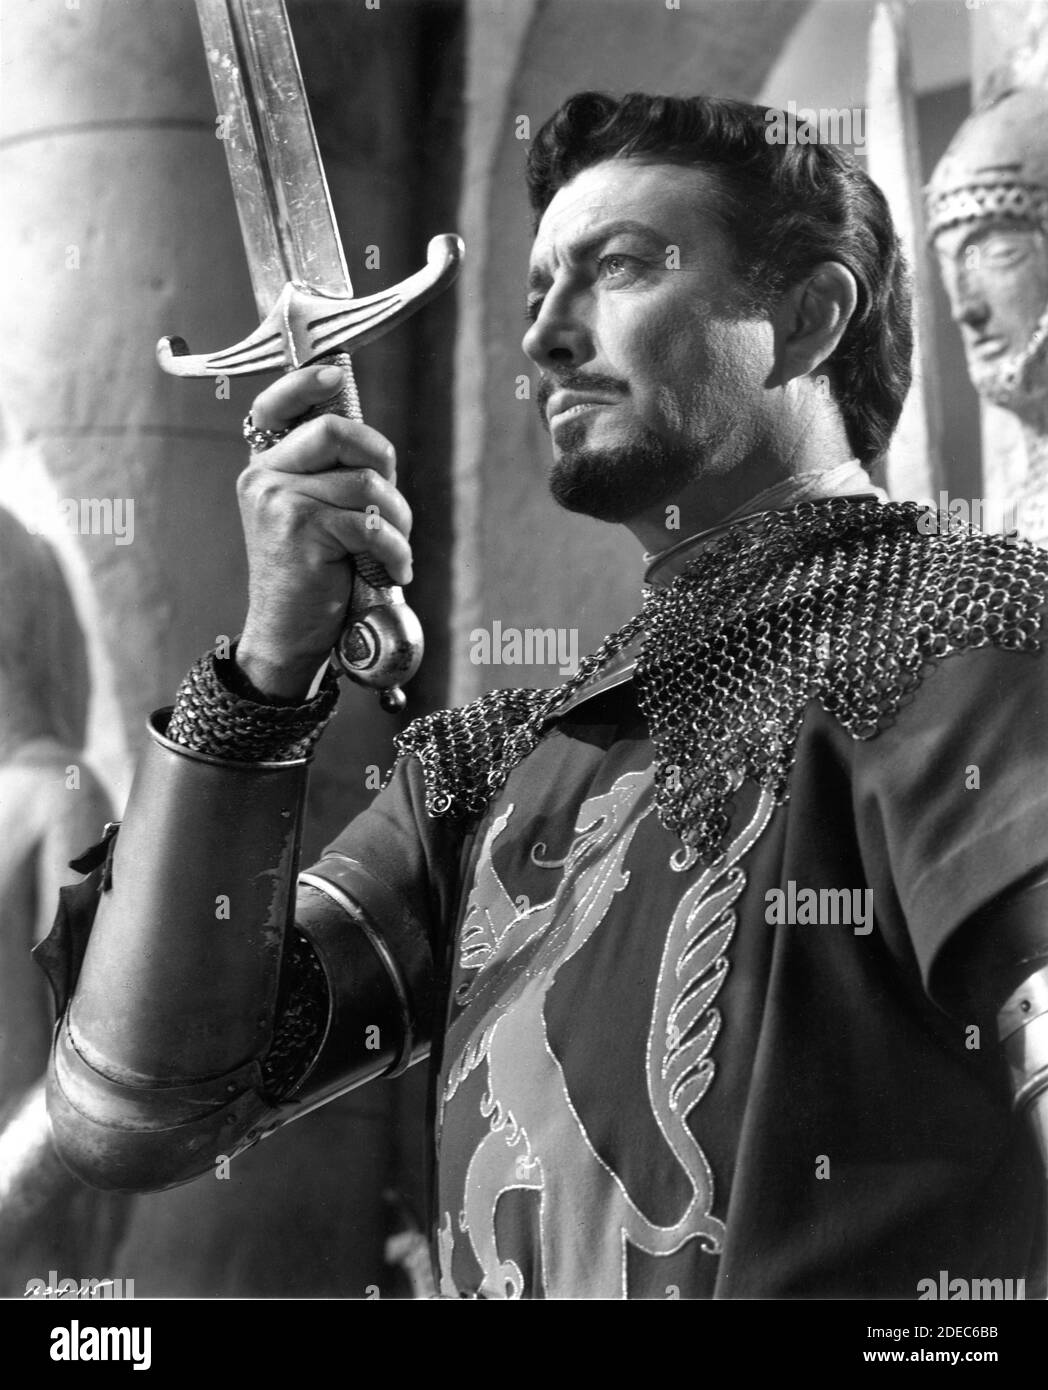 ROBERT TAYLOR Portrait as Lancelot in KNIGHTS OF THE ROUND TABLE 1953  director RICHARD THORPE based on Le Motte D'Arthur by Sir Thomas Malory  music Miklos Rozsa costumes Roger K. Furse Metro